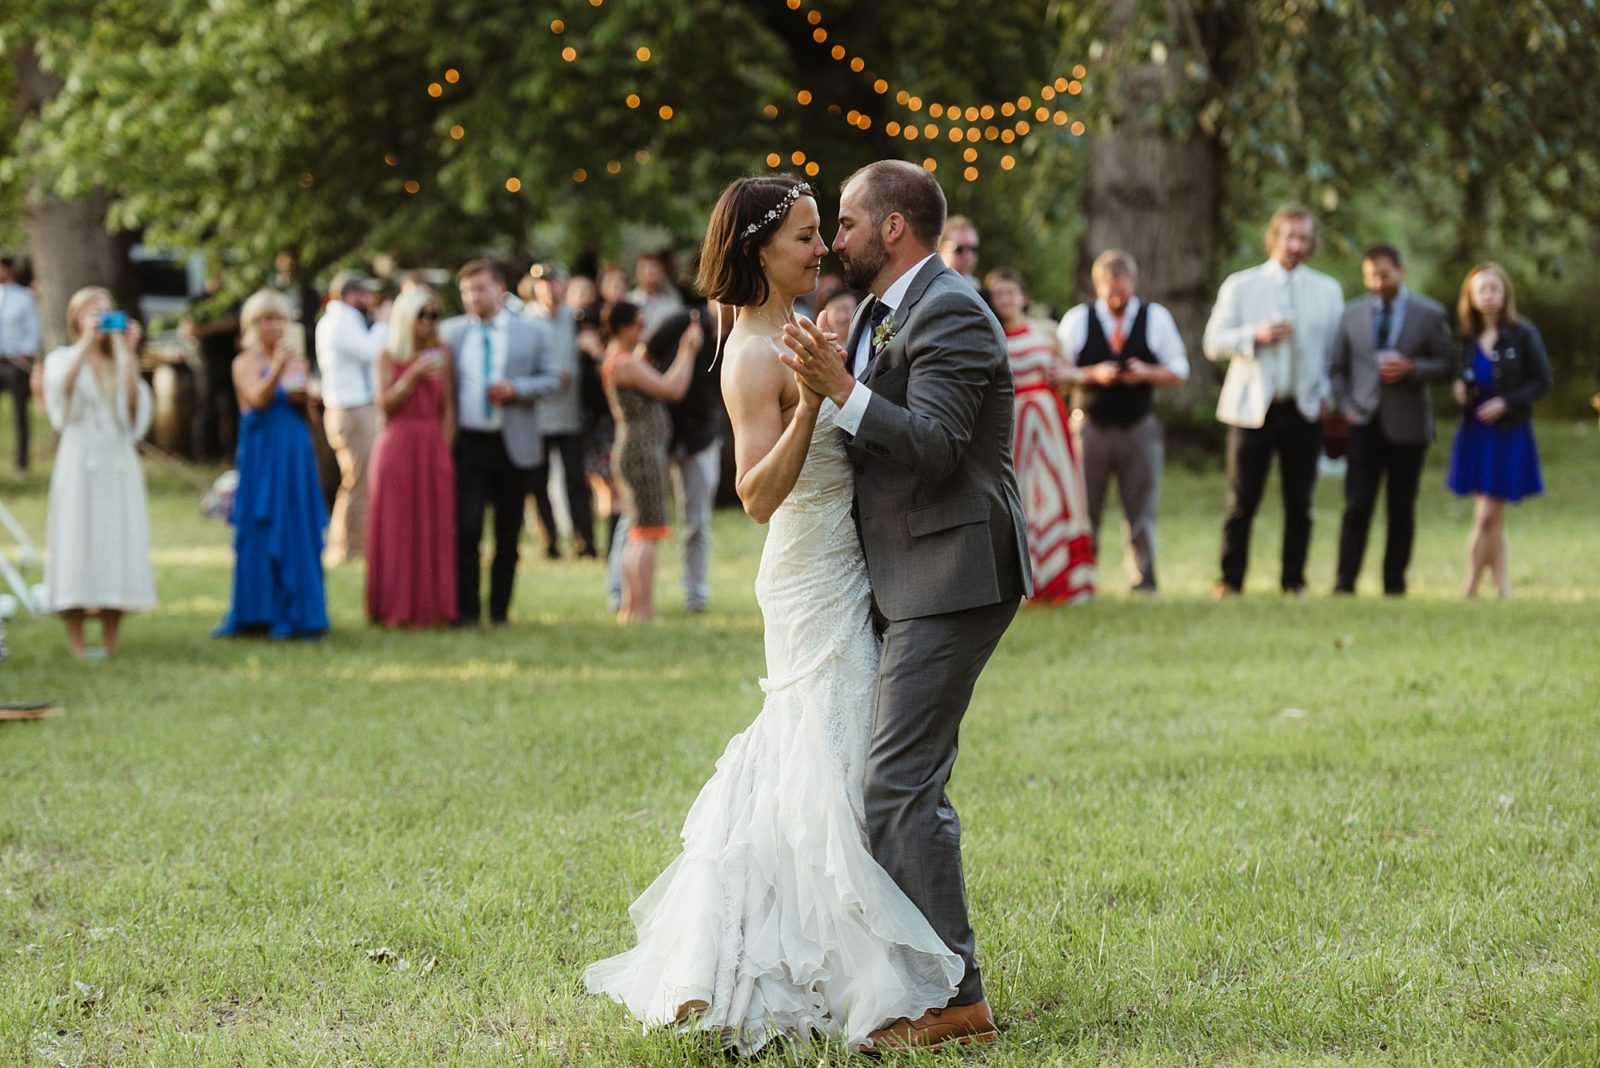 First dance in the grass under cafe lights at a summer wedding